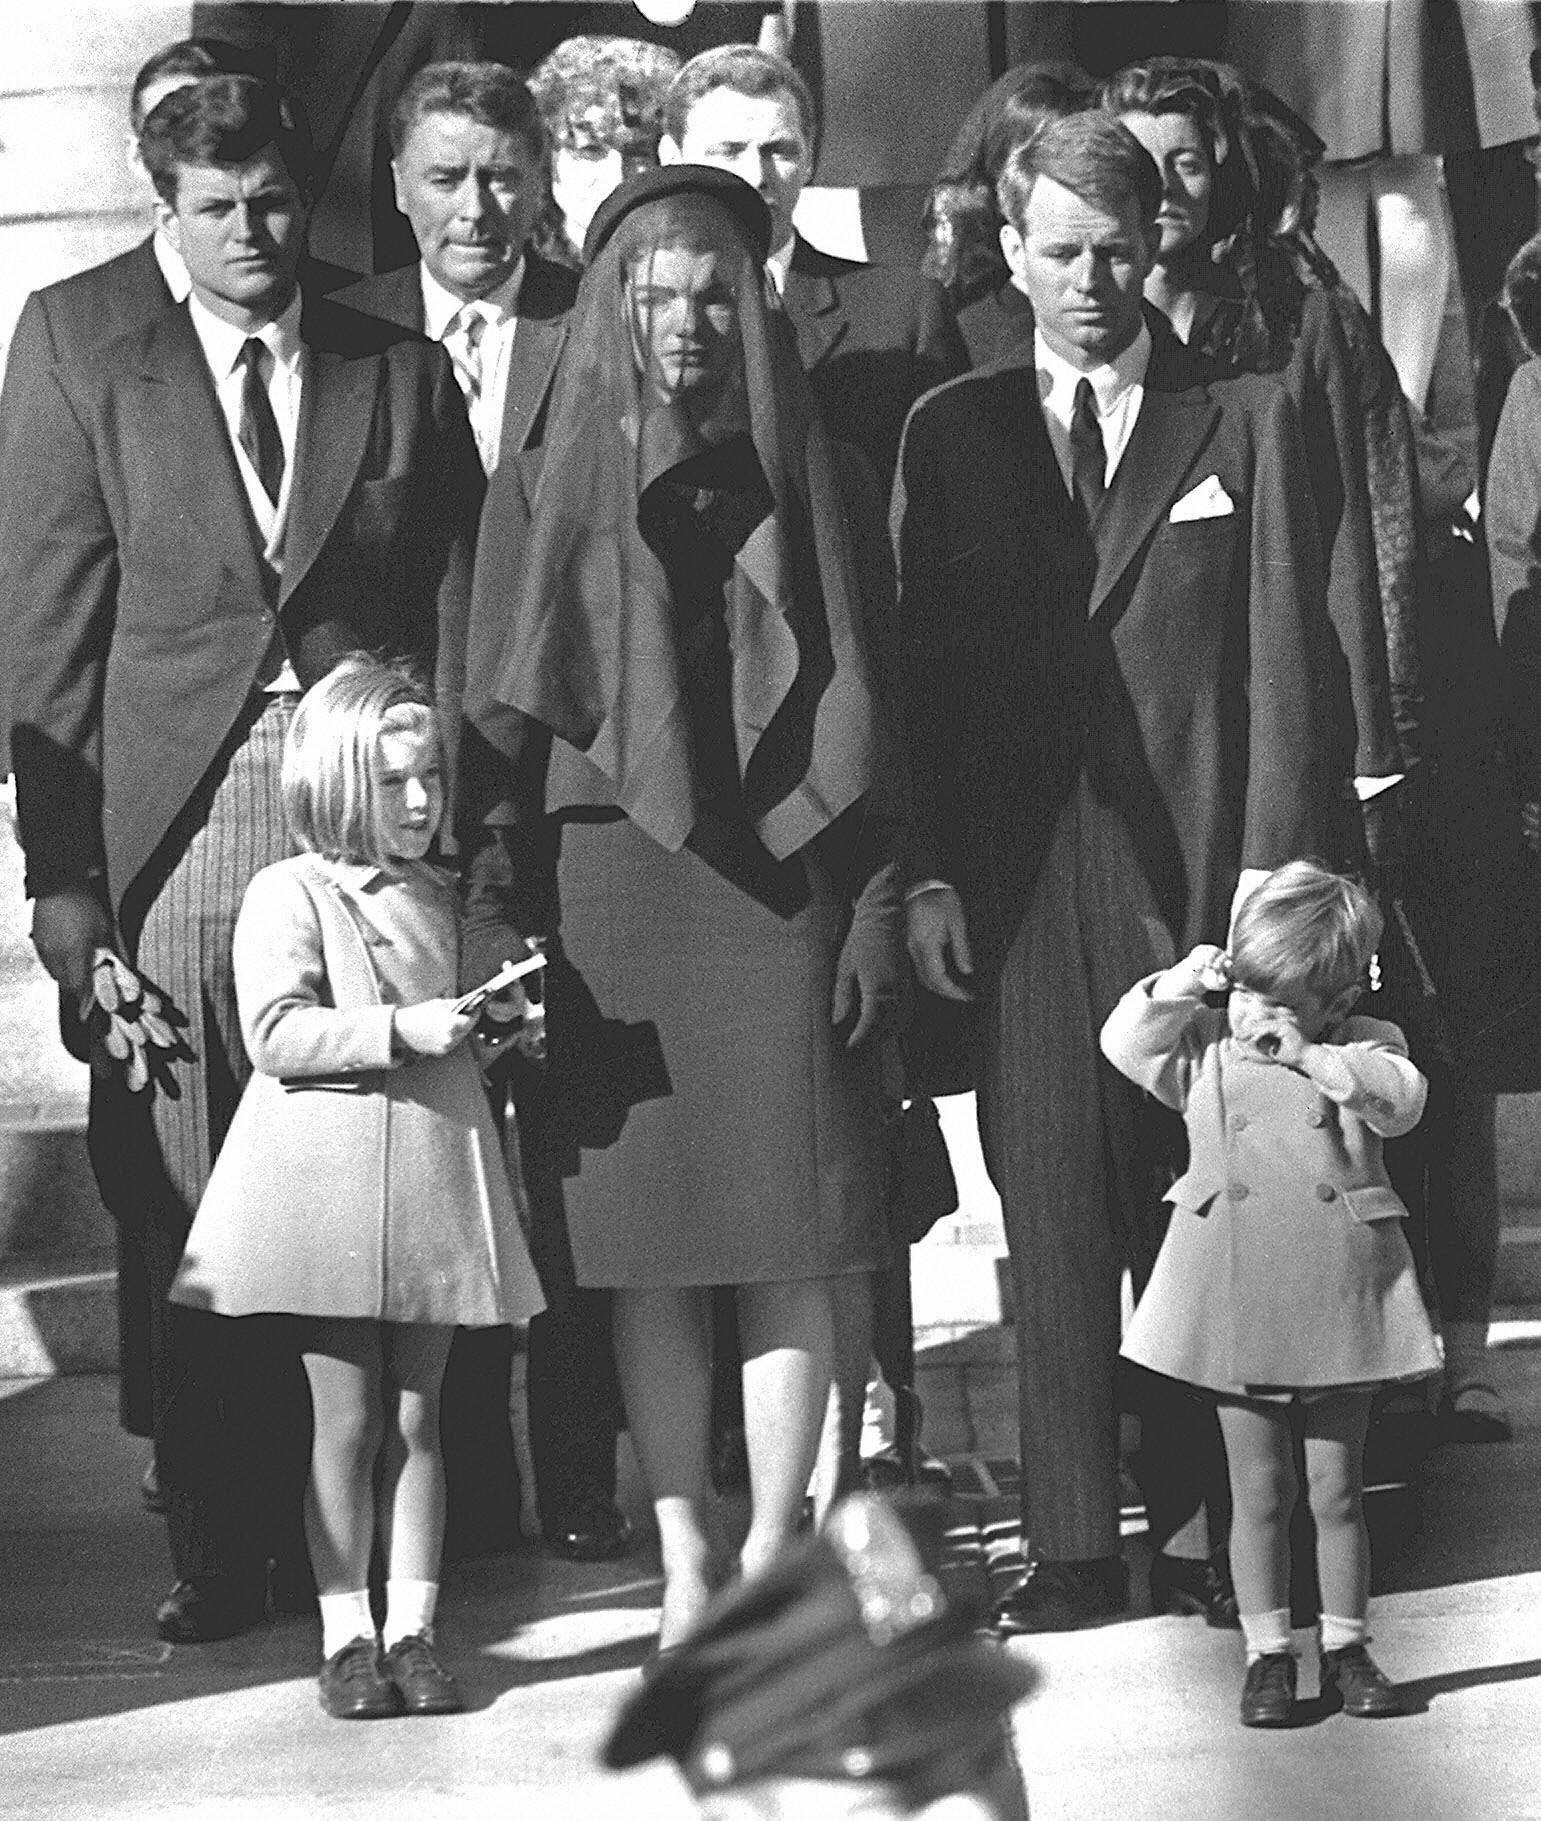 Jacqueline Kennedy(C) stands with her two children Caroline Kennedy(L) and John F. Kennedy, Jr.(R) and brothers-in law Ted Kennedy (L, back) and Robert Kennedy (2ndR) at the funeral of her husband US President John F. Kennedy 26 November 1963 in Washington, DC.  (Source: STAFF/AFP/Getty Images)